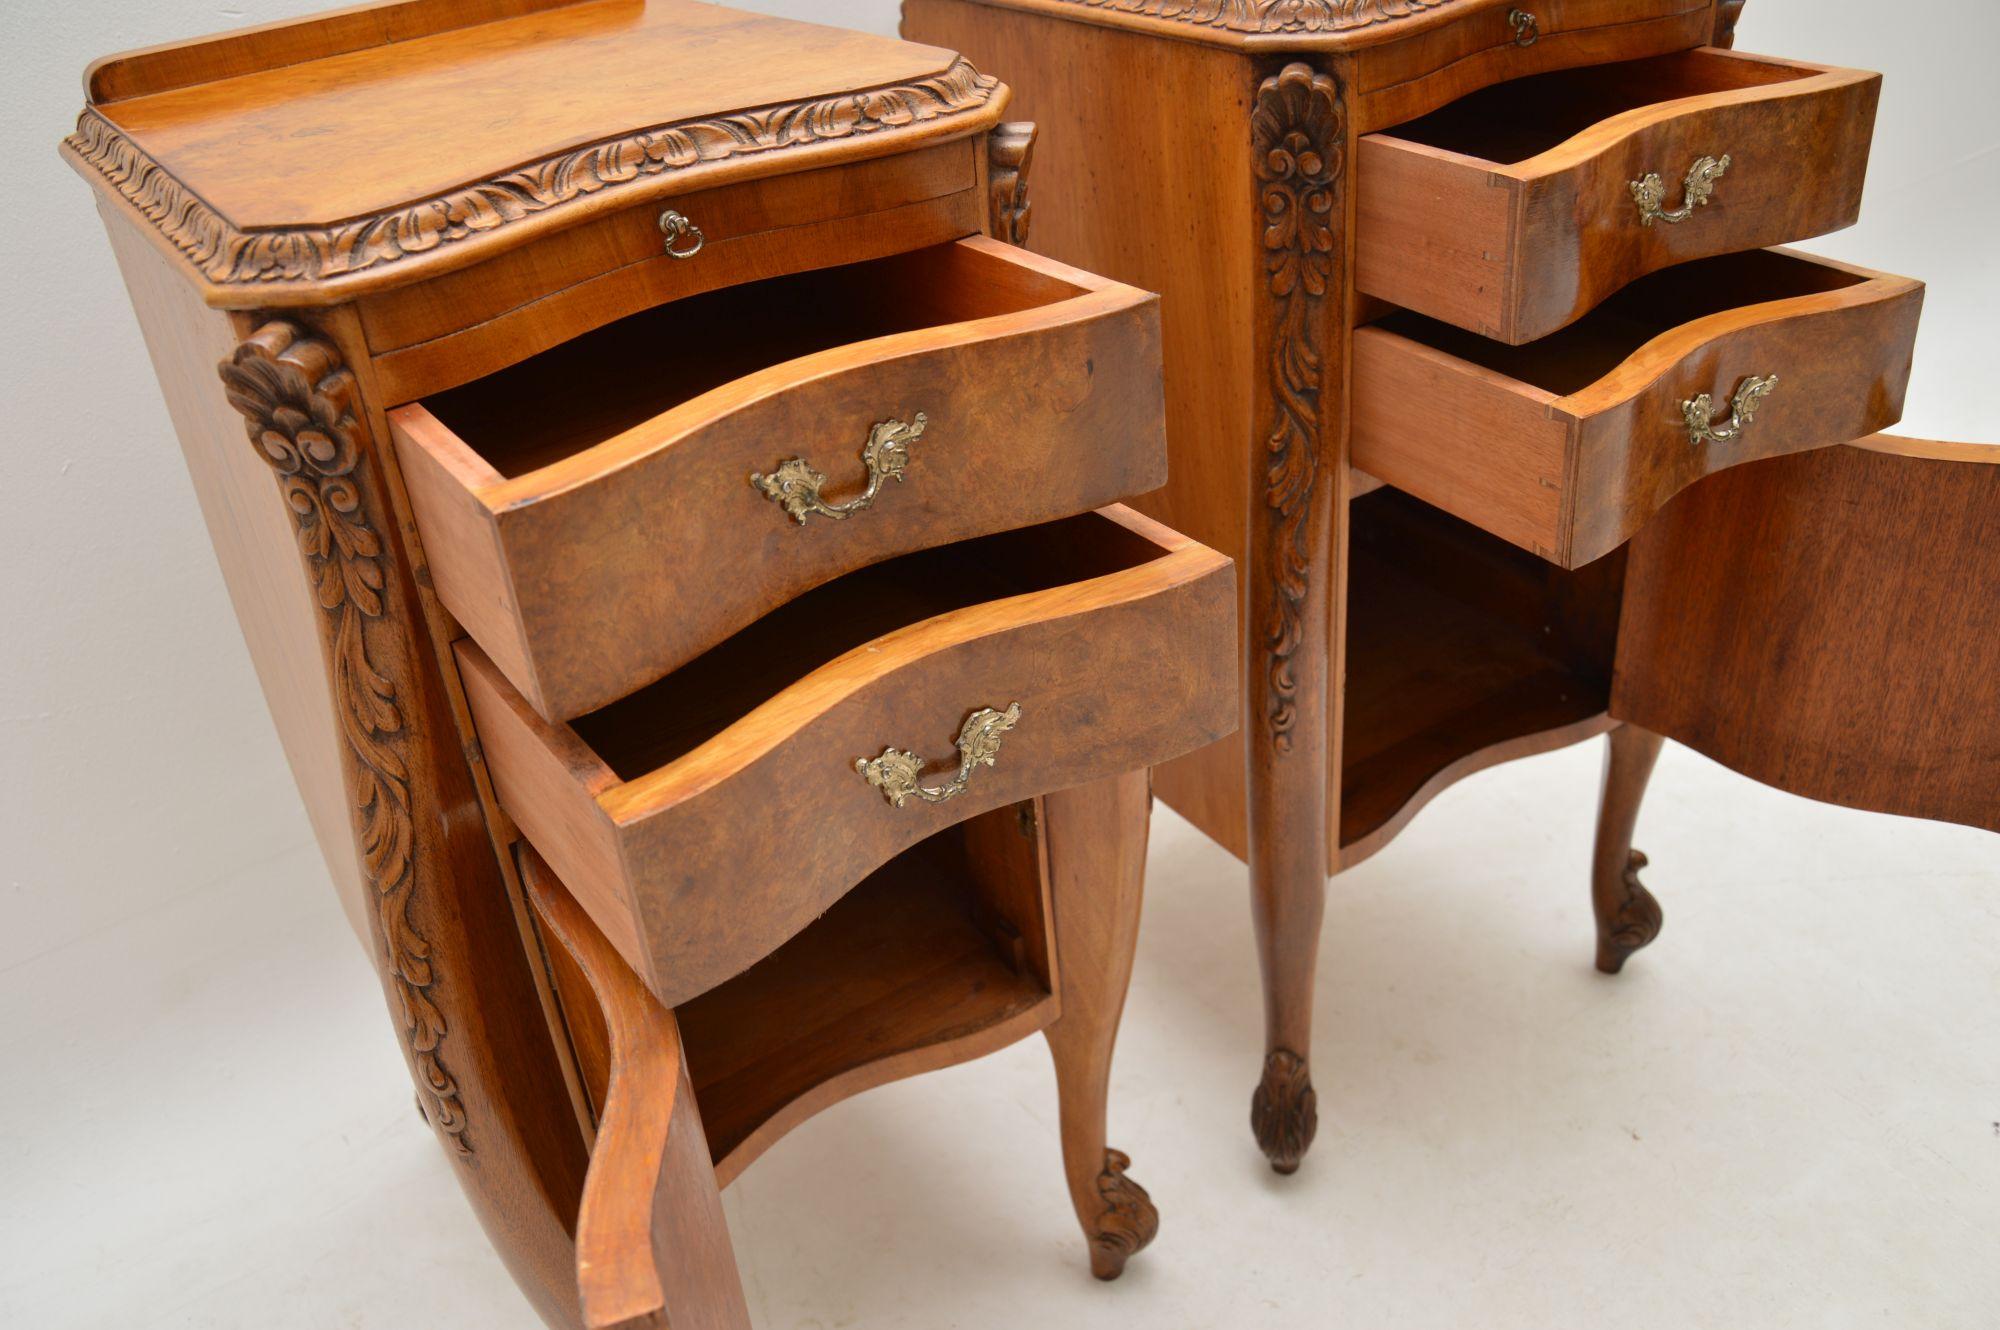 Mirror Pair of Antique Burr Walnut Bedside Cabinets